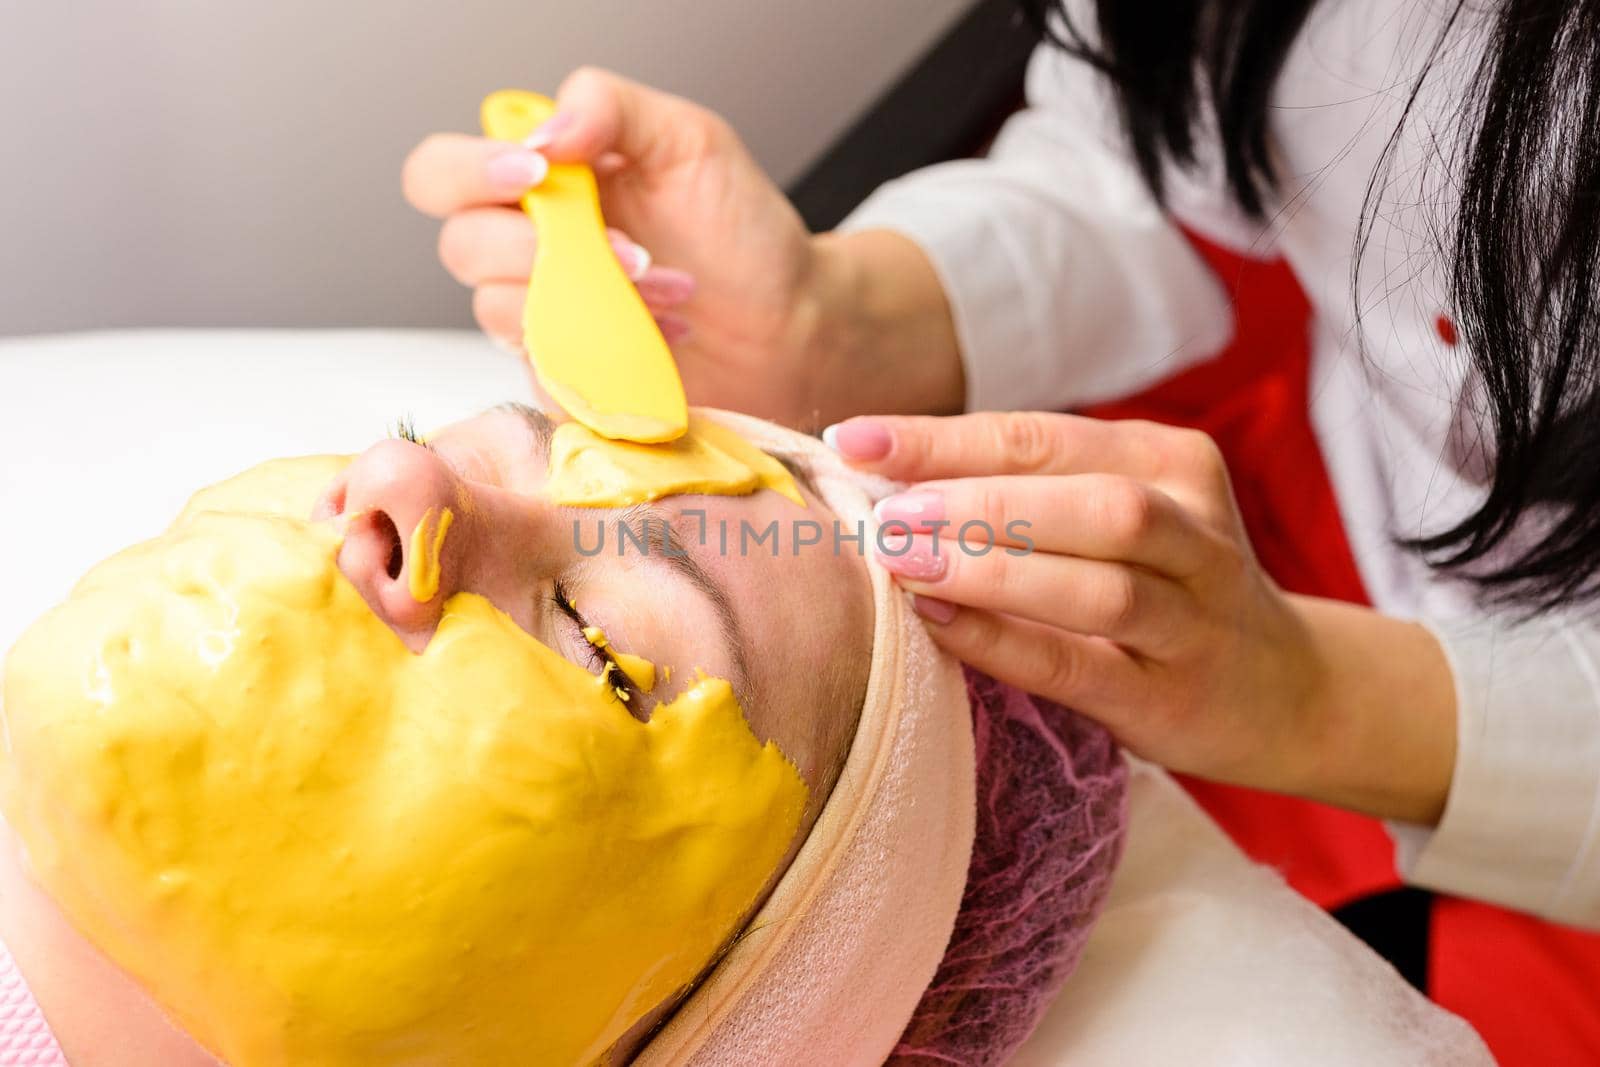 Moisturizing the skin at the spa, the beautician applies a gold mask to the client's face. new